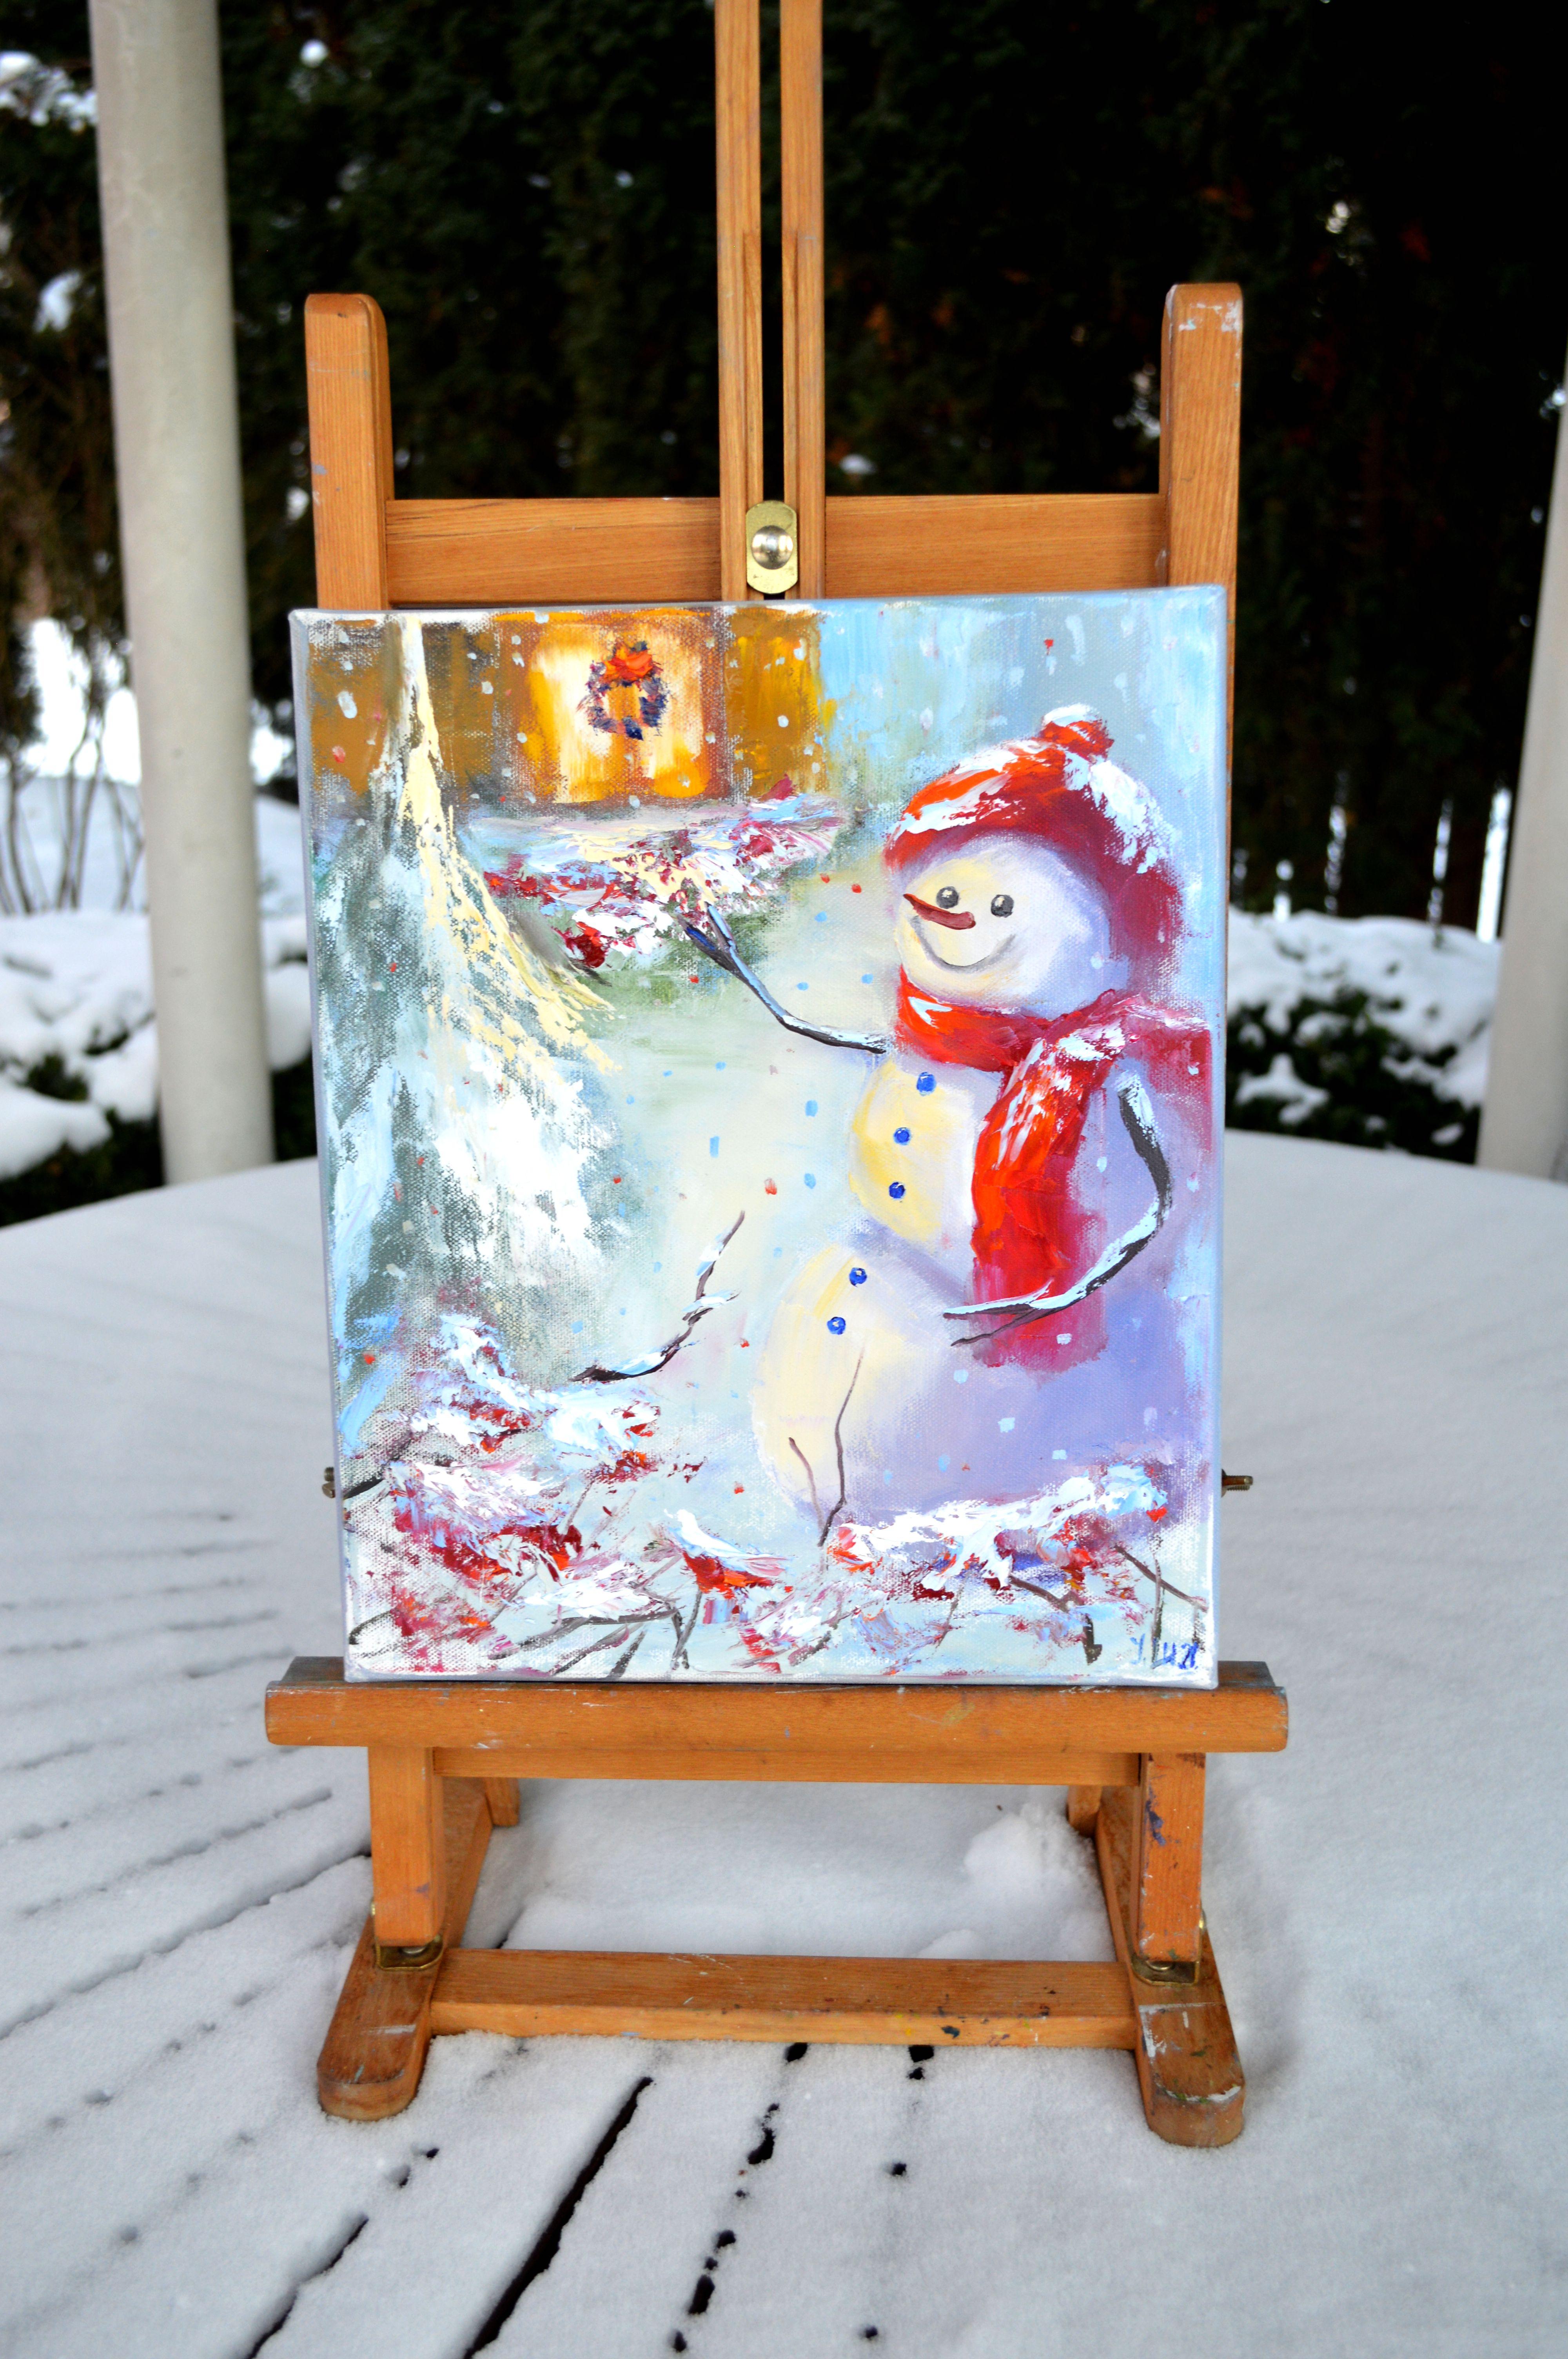 In this oil painting, I captured the joyful essence of winter's enchantment. The cheerful snowman, adorned in vibrant attire, embodies the warmth of the season against the cool, impressionistic landscape. Twinkling flecks of snow and lively